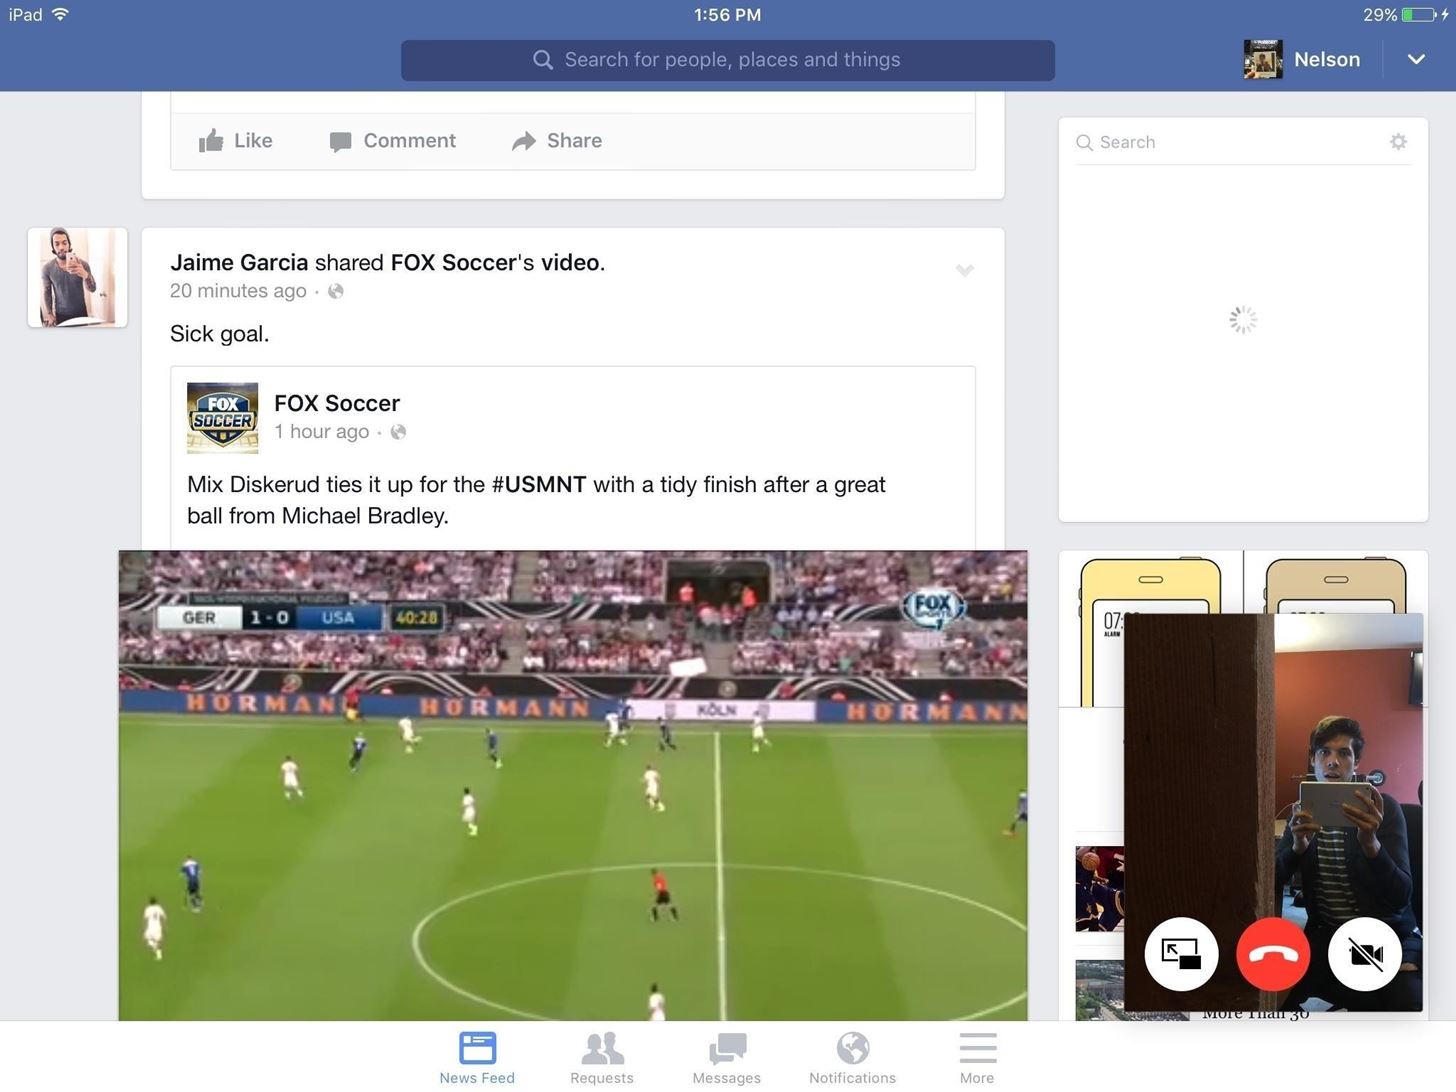 How to Get a Floating Video Window While Multitasking on Your iPad in iOS 9